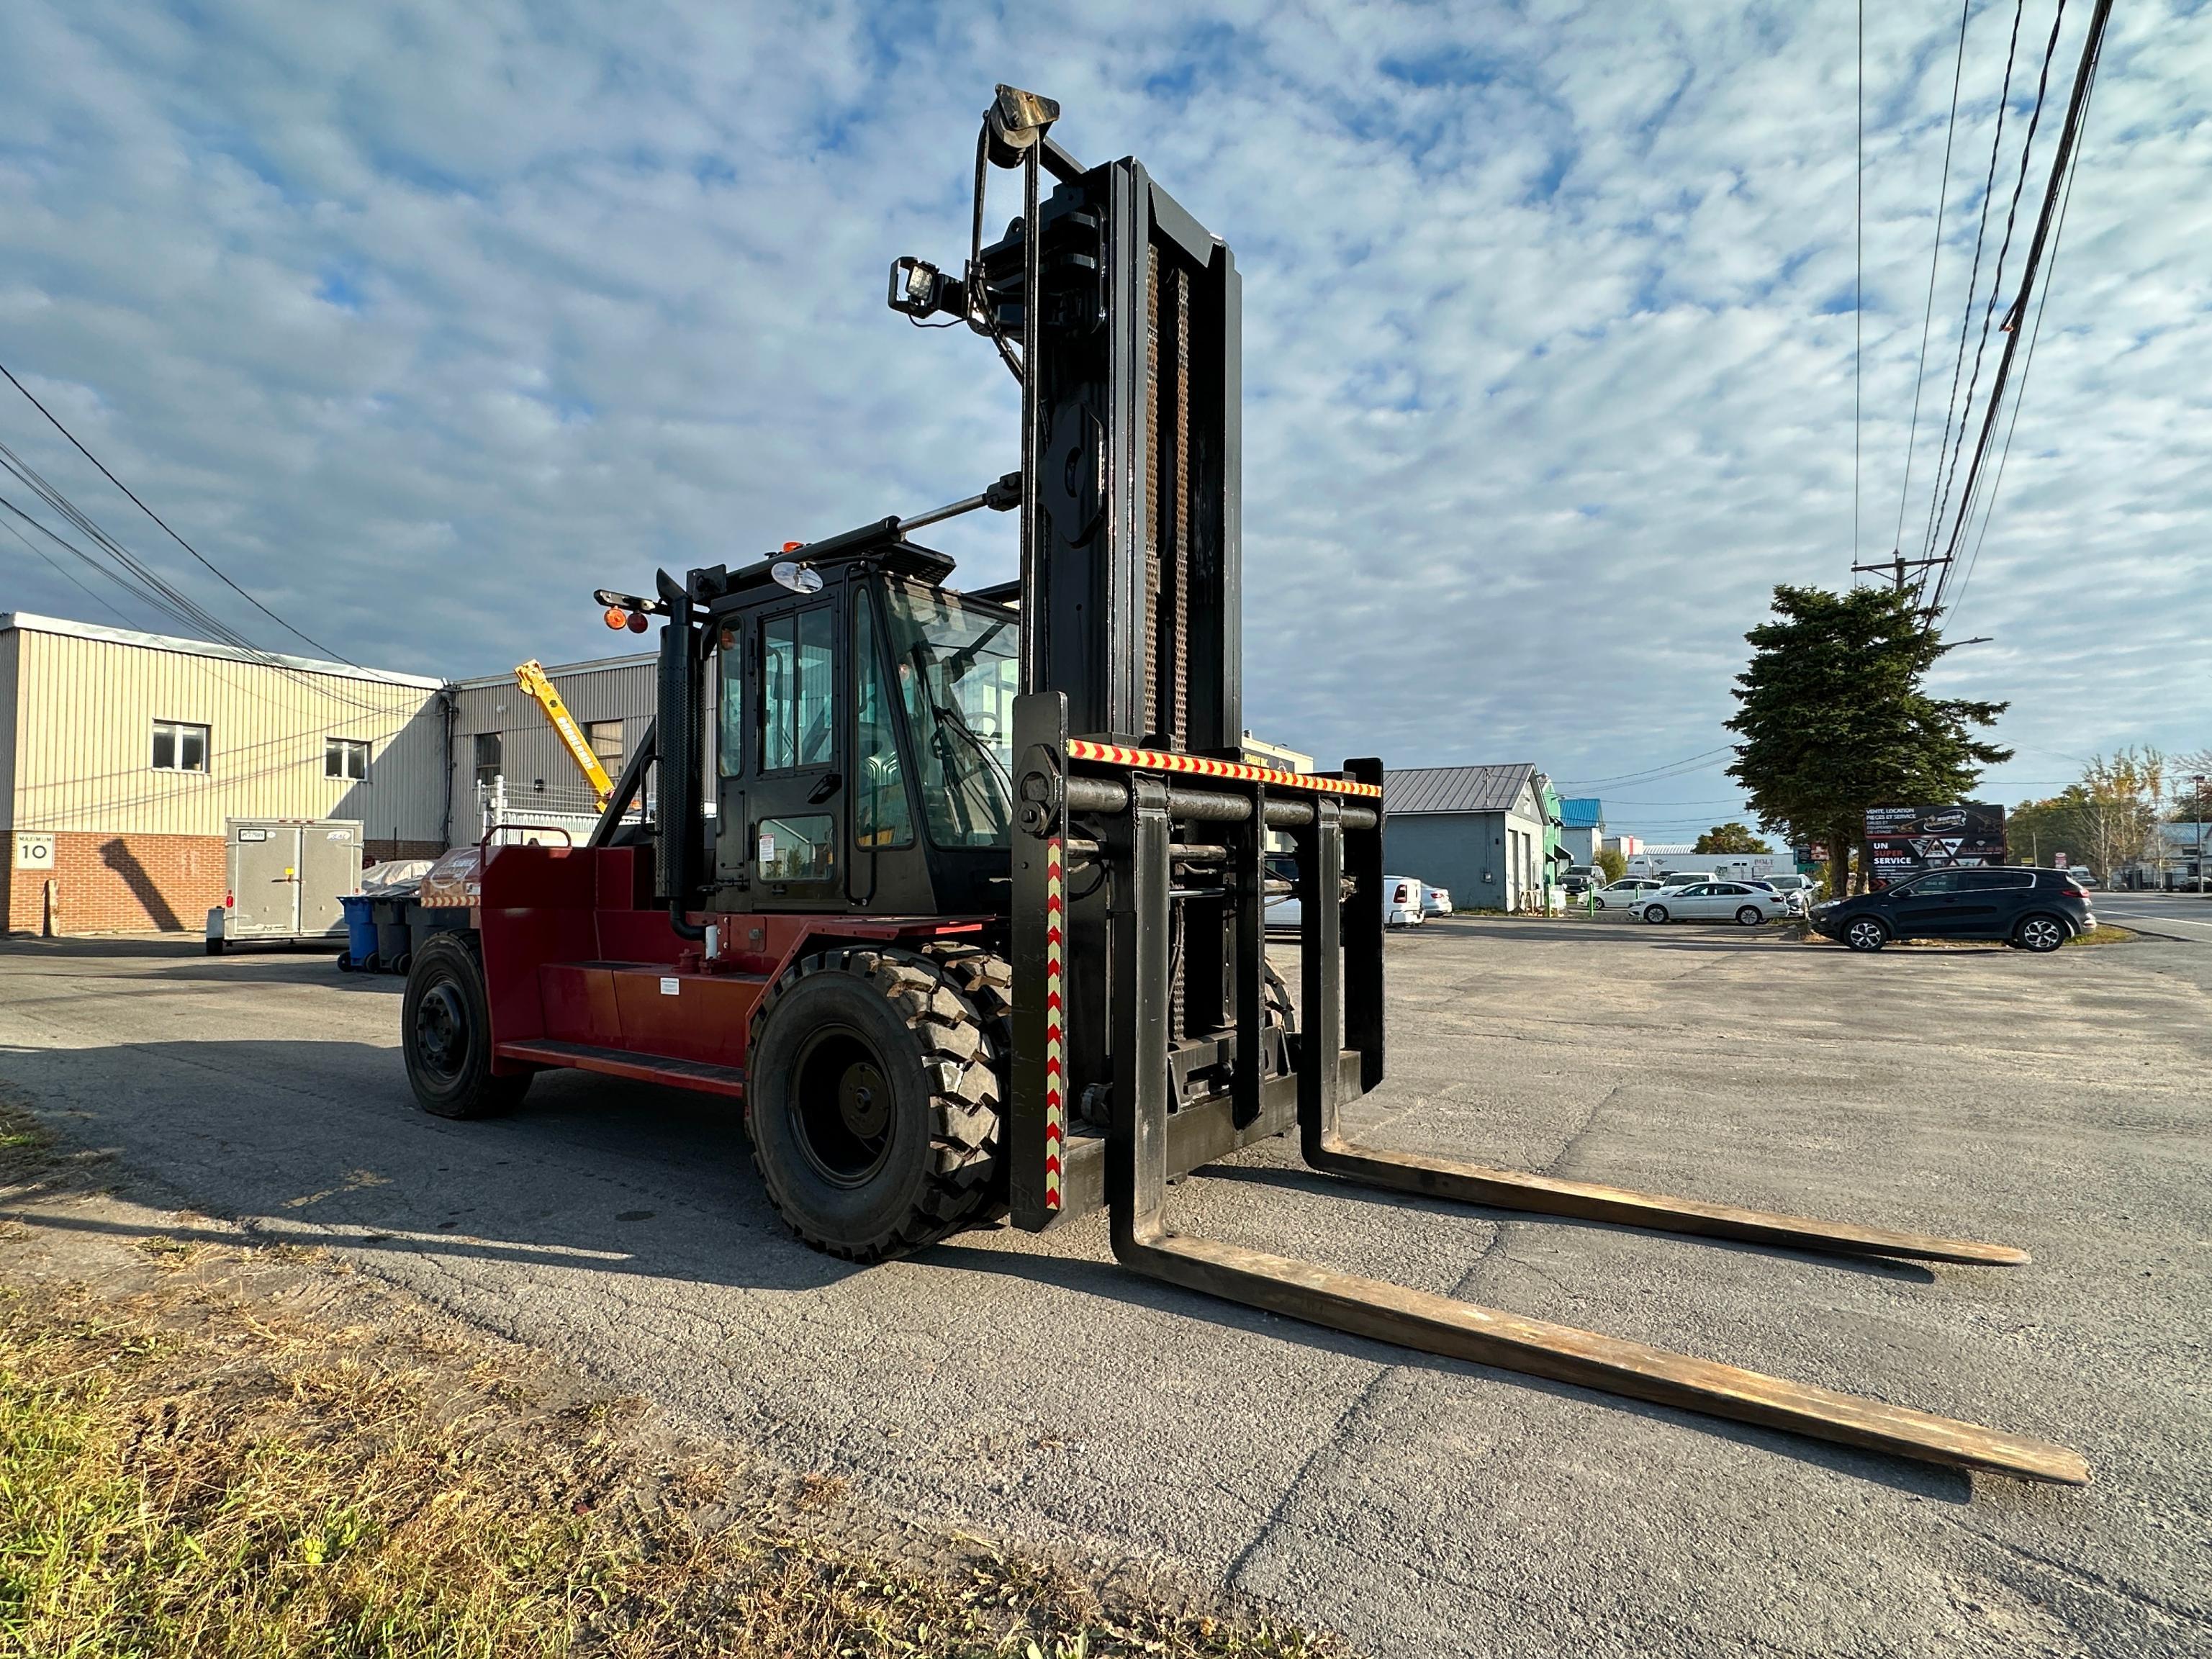 FORKLIFT Taylor TH350L FORKLIFT SN SBH33936 powered by Cummins diesel engine, equipped with cab,